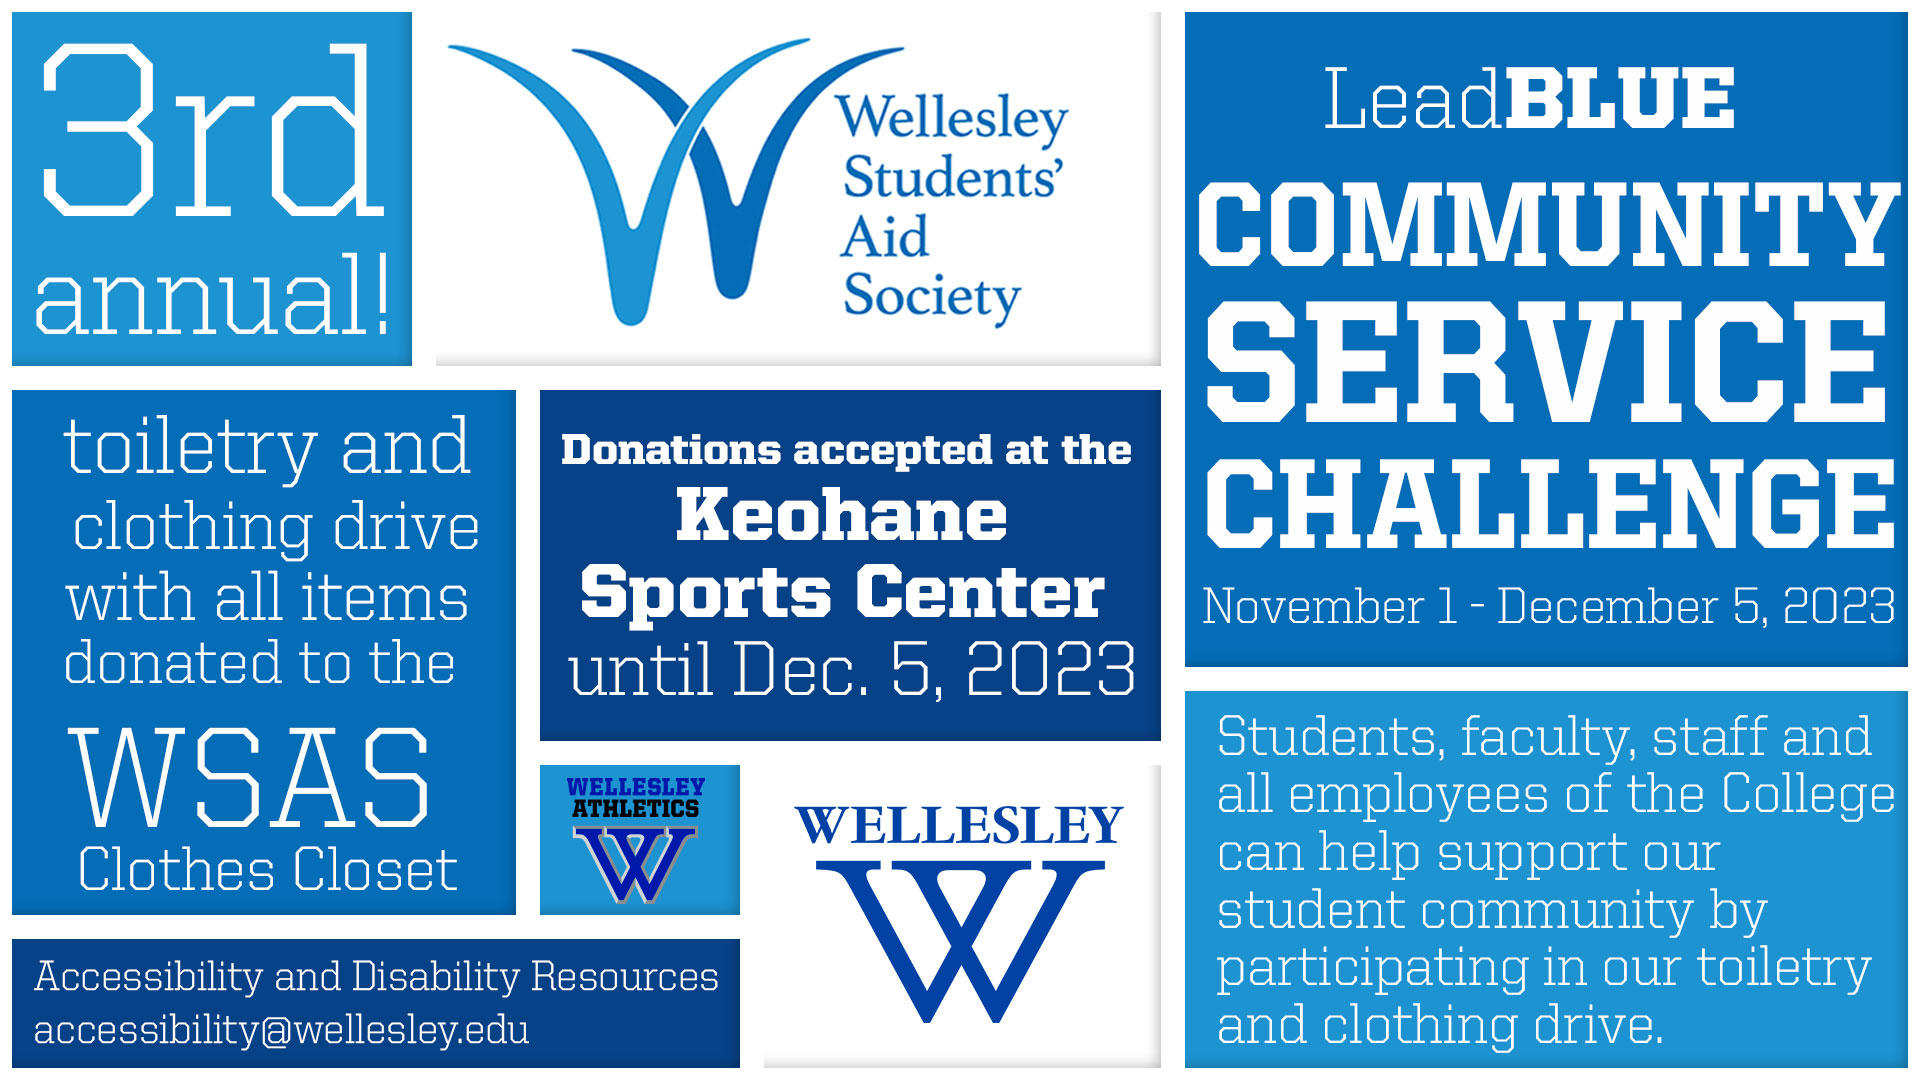 Support the LeadBLUE Community Service Challenge to Benefit the Wellesley Students’ Aid Society, Nov. 1 - Dec. 5